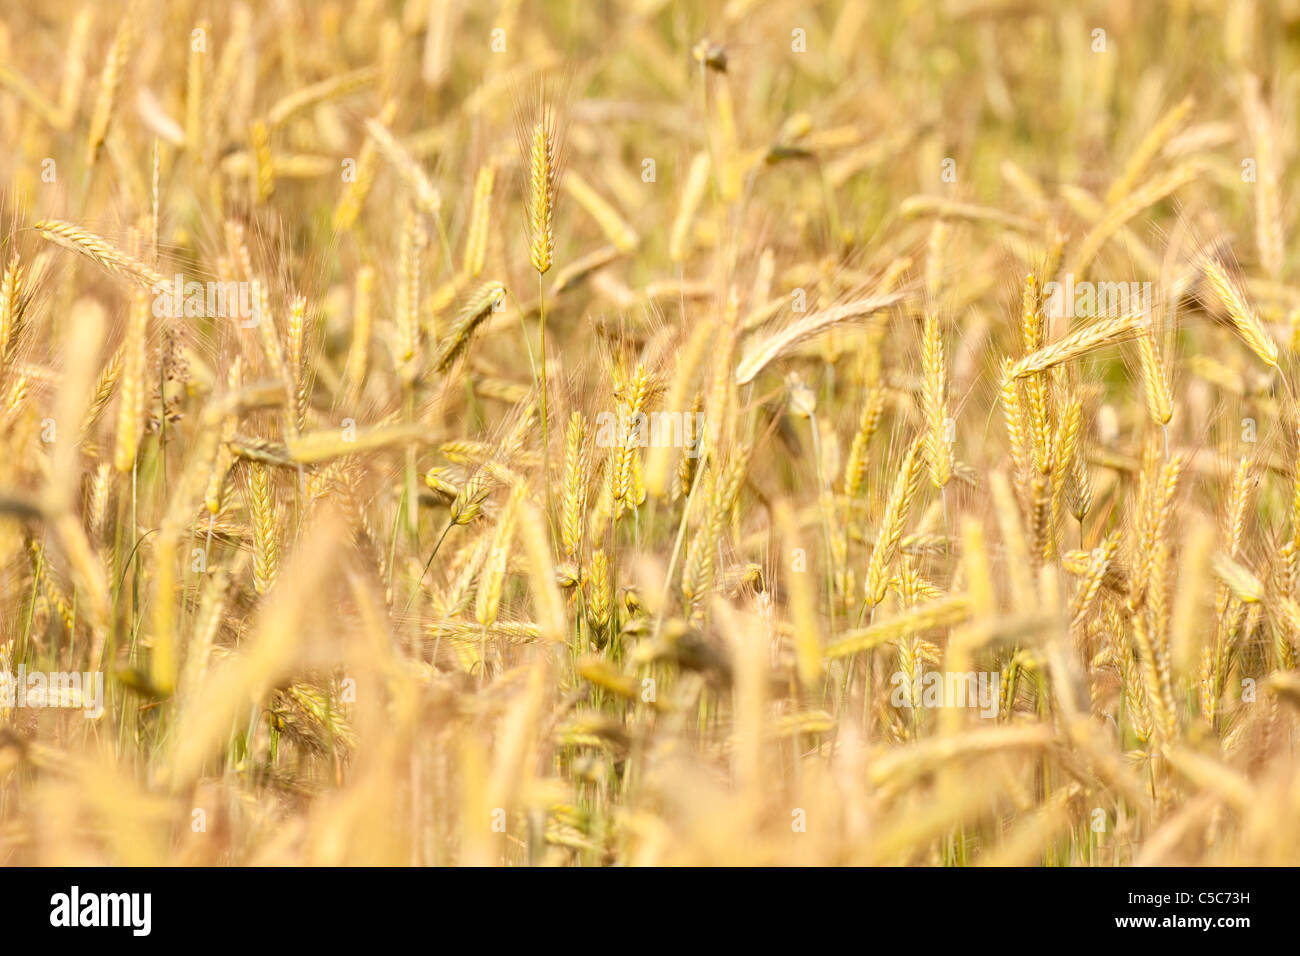 close up of barley in a field ready for harvest Stock Photo